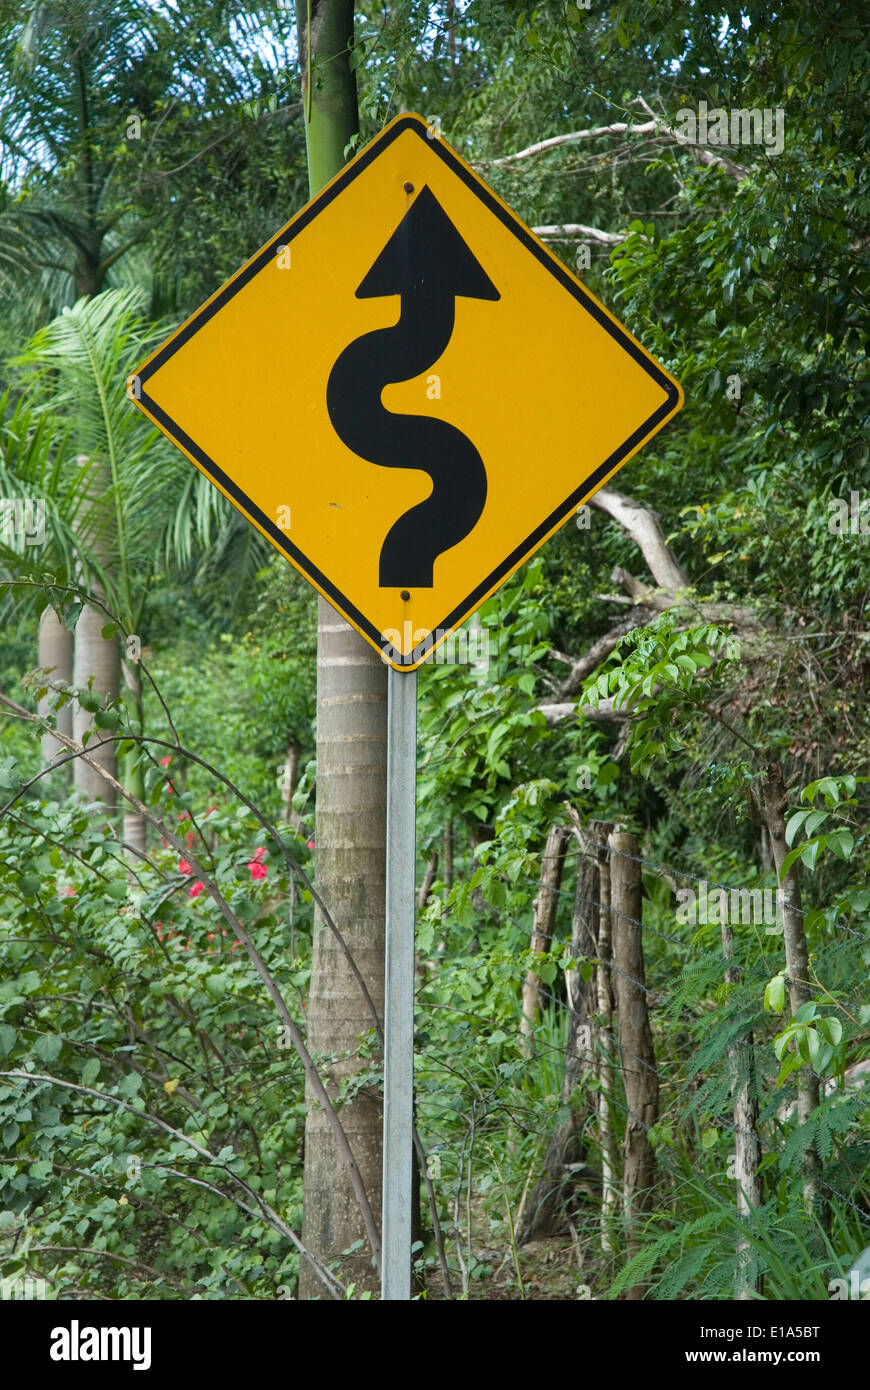 traffic sign for curvaceous street Stock Photo